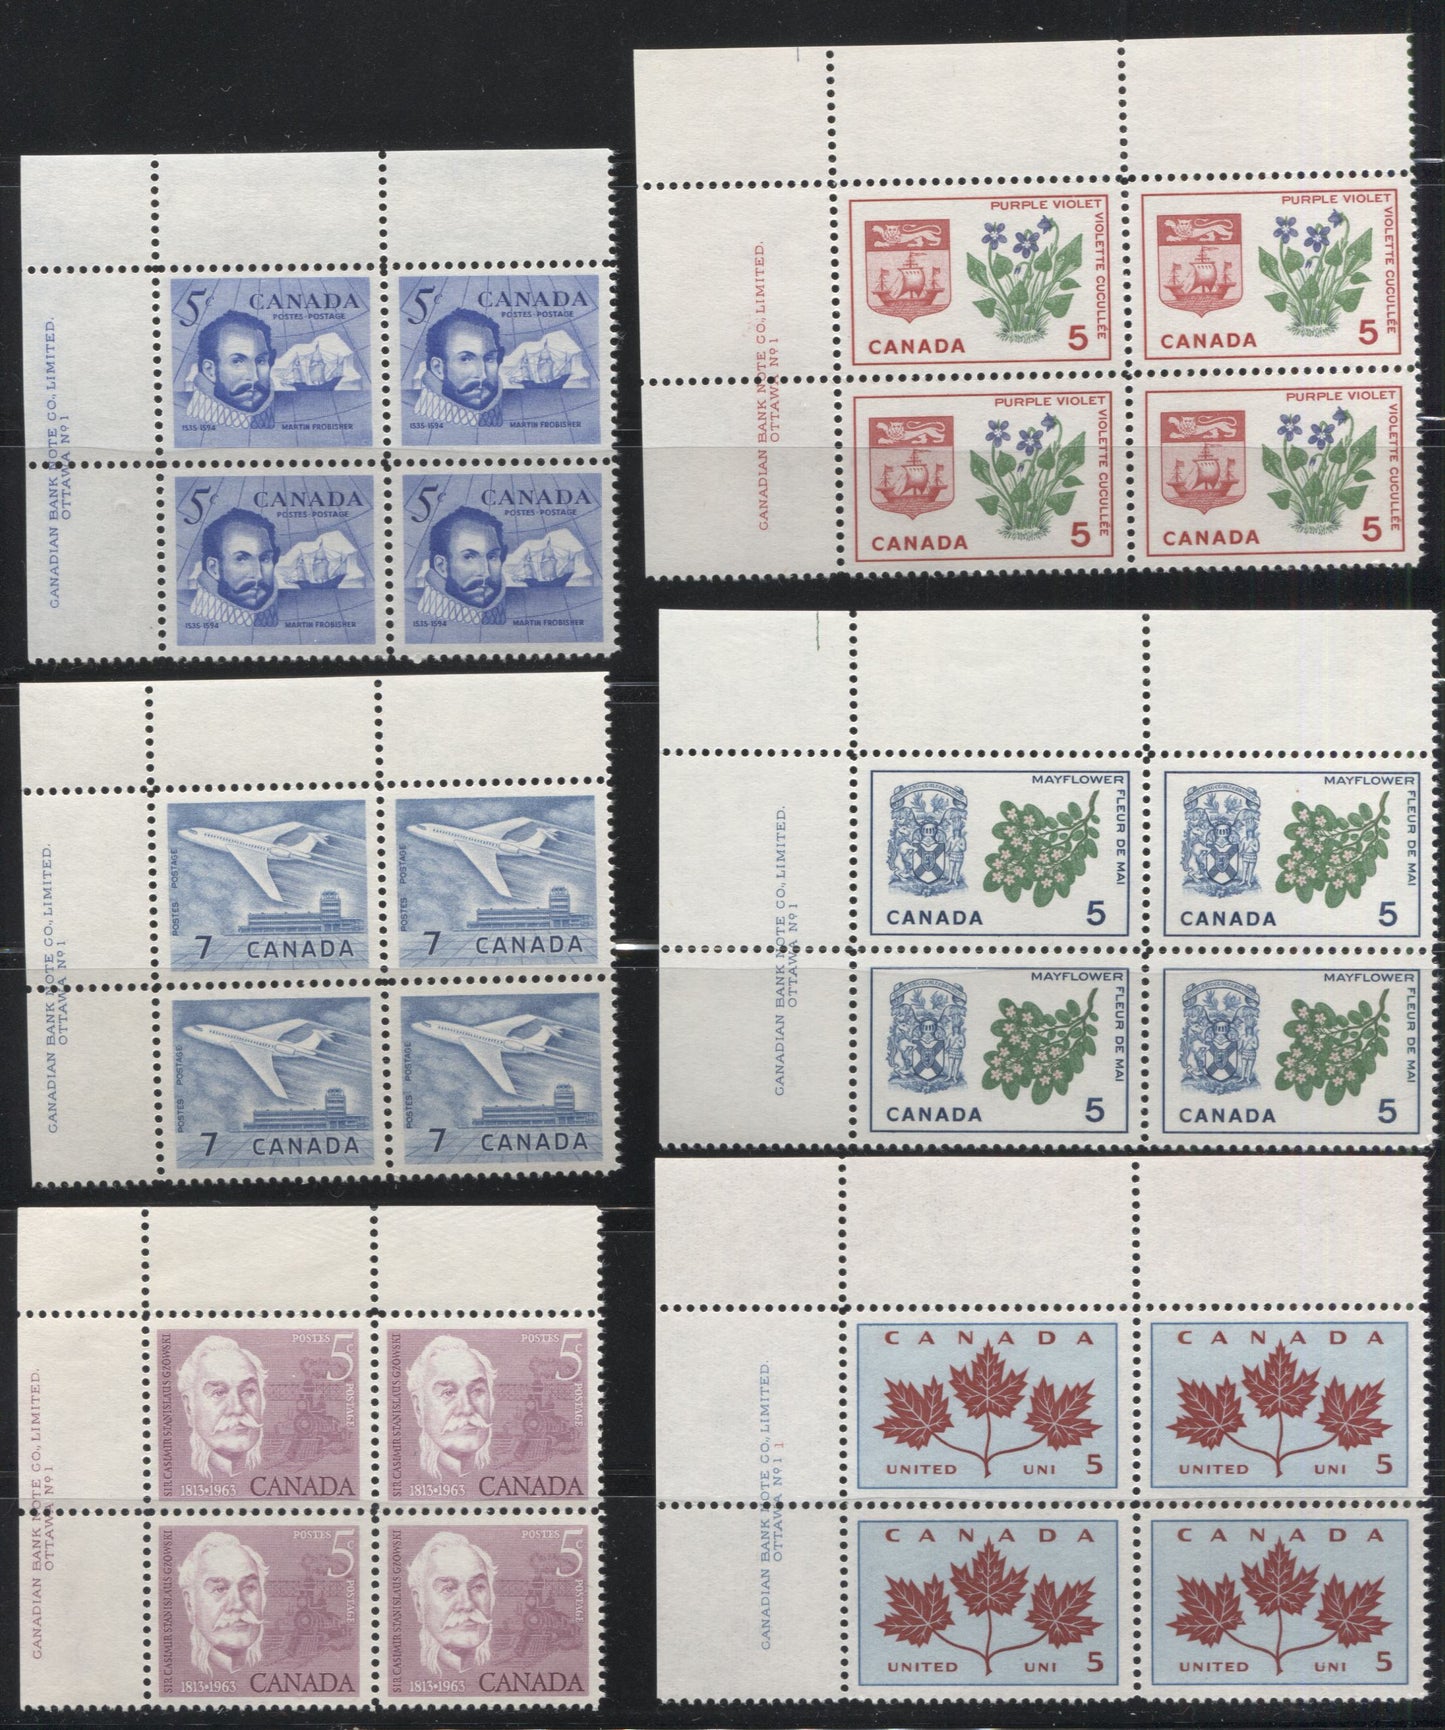 Lot 13 Canada #410, 412-414, 416-420 5c & 7c Rose Lilac - Blue Sir Casimir Gzowski - Jet Plane, 1963-1966 Commemoratives & Definitives, 9 VFNH UL Plate 1 Blocks Of 4, 417 With Fluorescent Ink